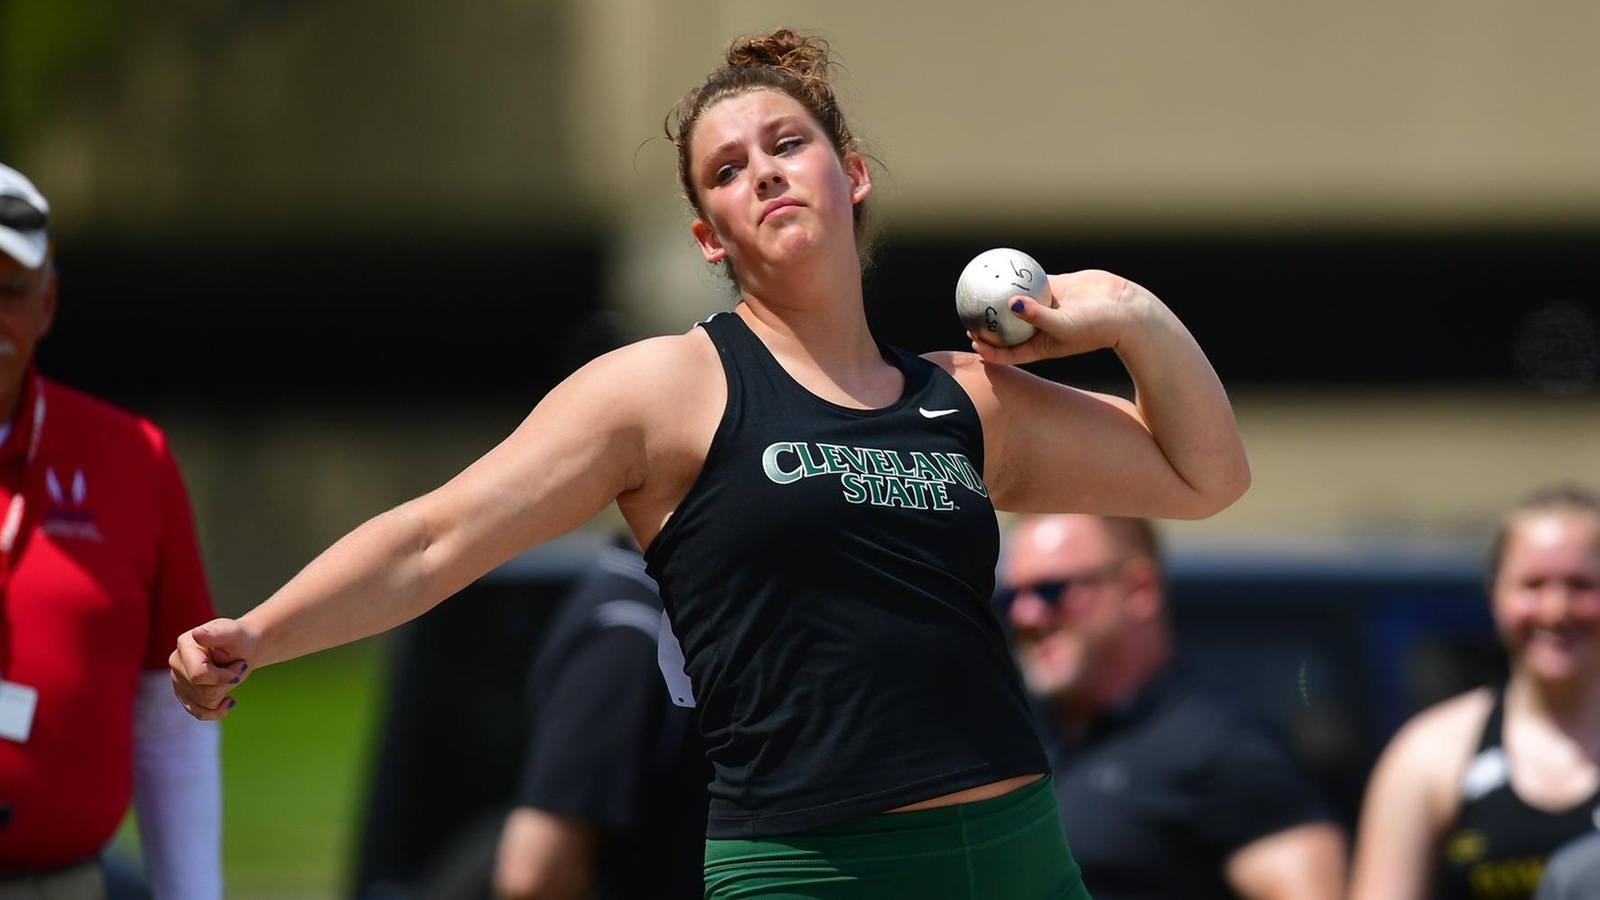 Cleveland State Track & Field Has Strong Second Day At #HLTF Outdoor Championships